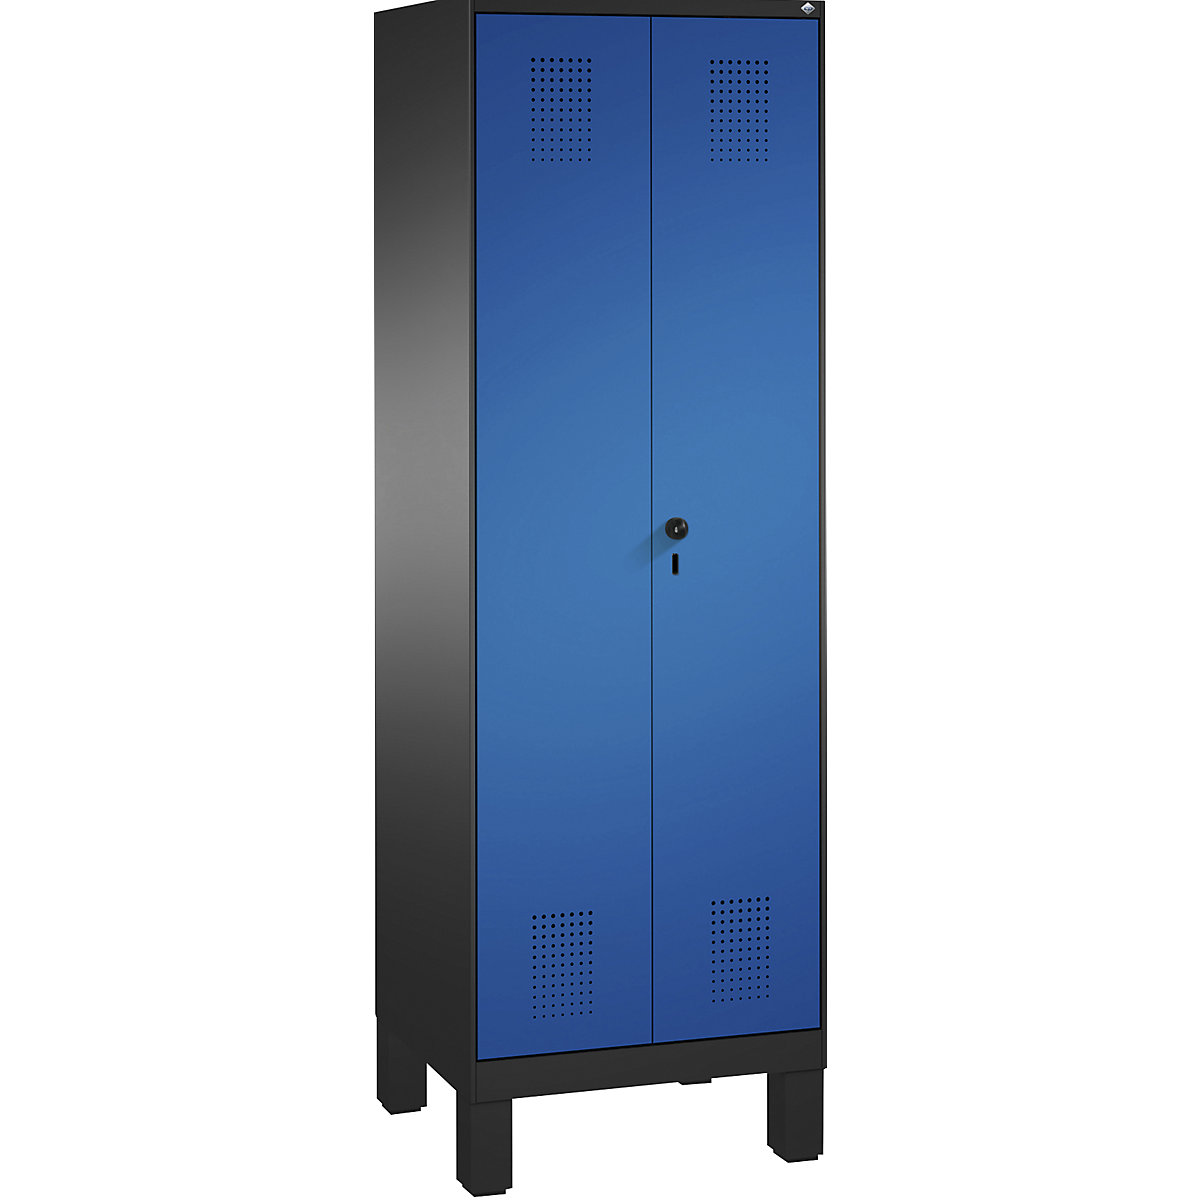 EVOLO storage cupboard, doors close in the middle, with feet – C+P, 2 compartments, 8 shelves, compartment width 300 mm, black grey / gentian blue